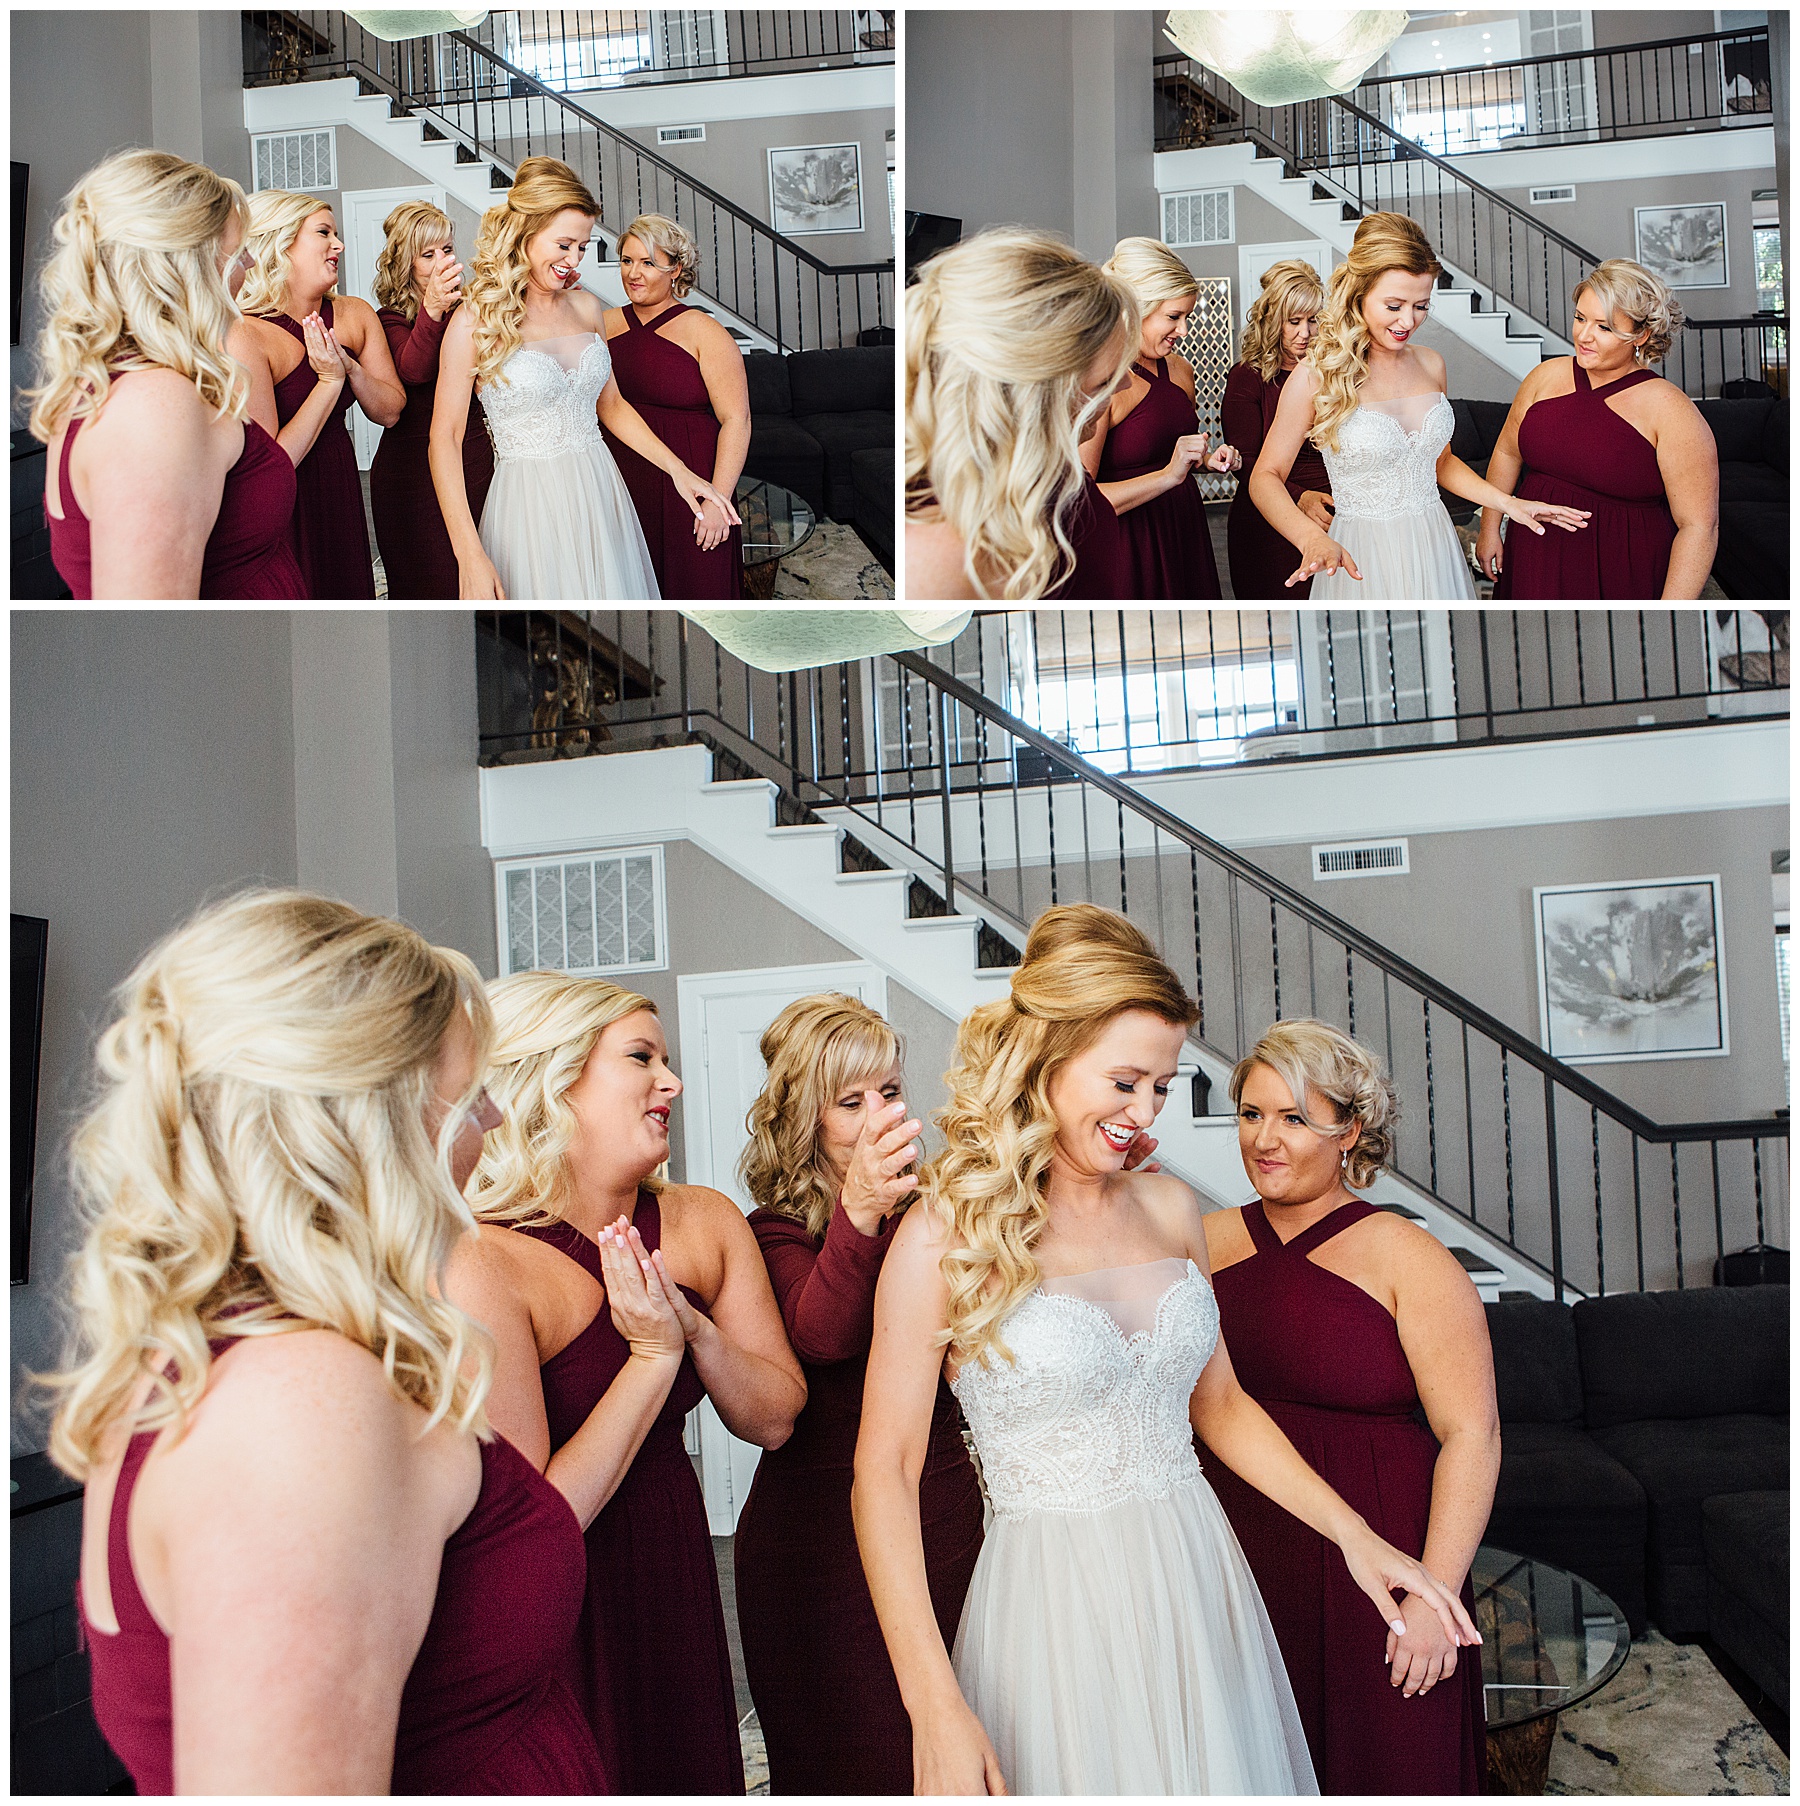 Wedding at Magnolia Hotel,Andrea Bibeault: a wedding photojournalist specializes in real,photojournalistic wedding photography. Based in Omaha,we travel all over the midwest and country.,